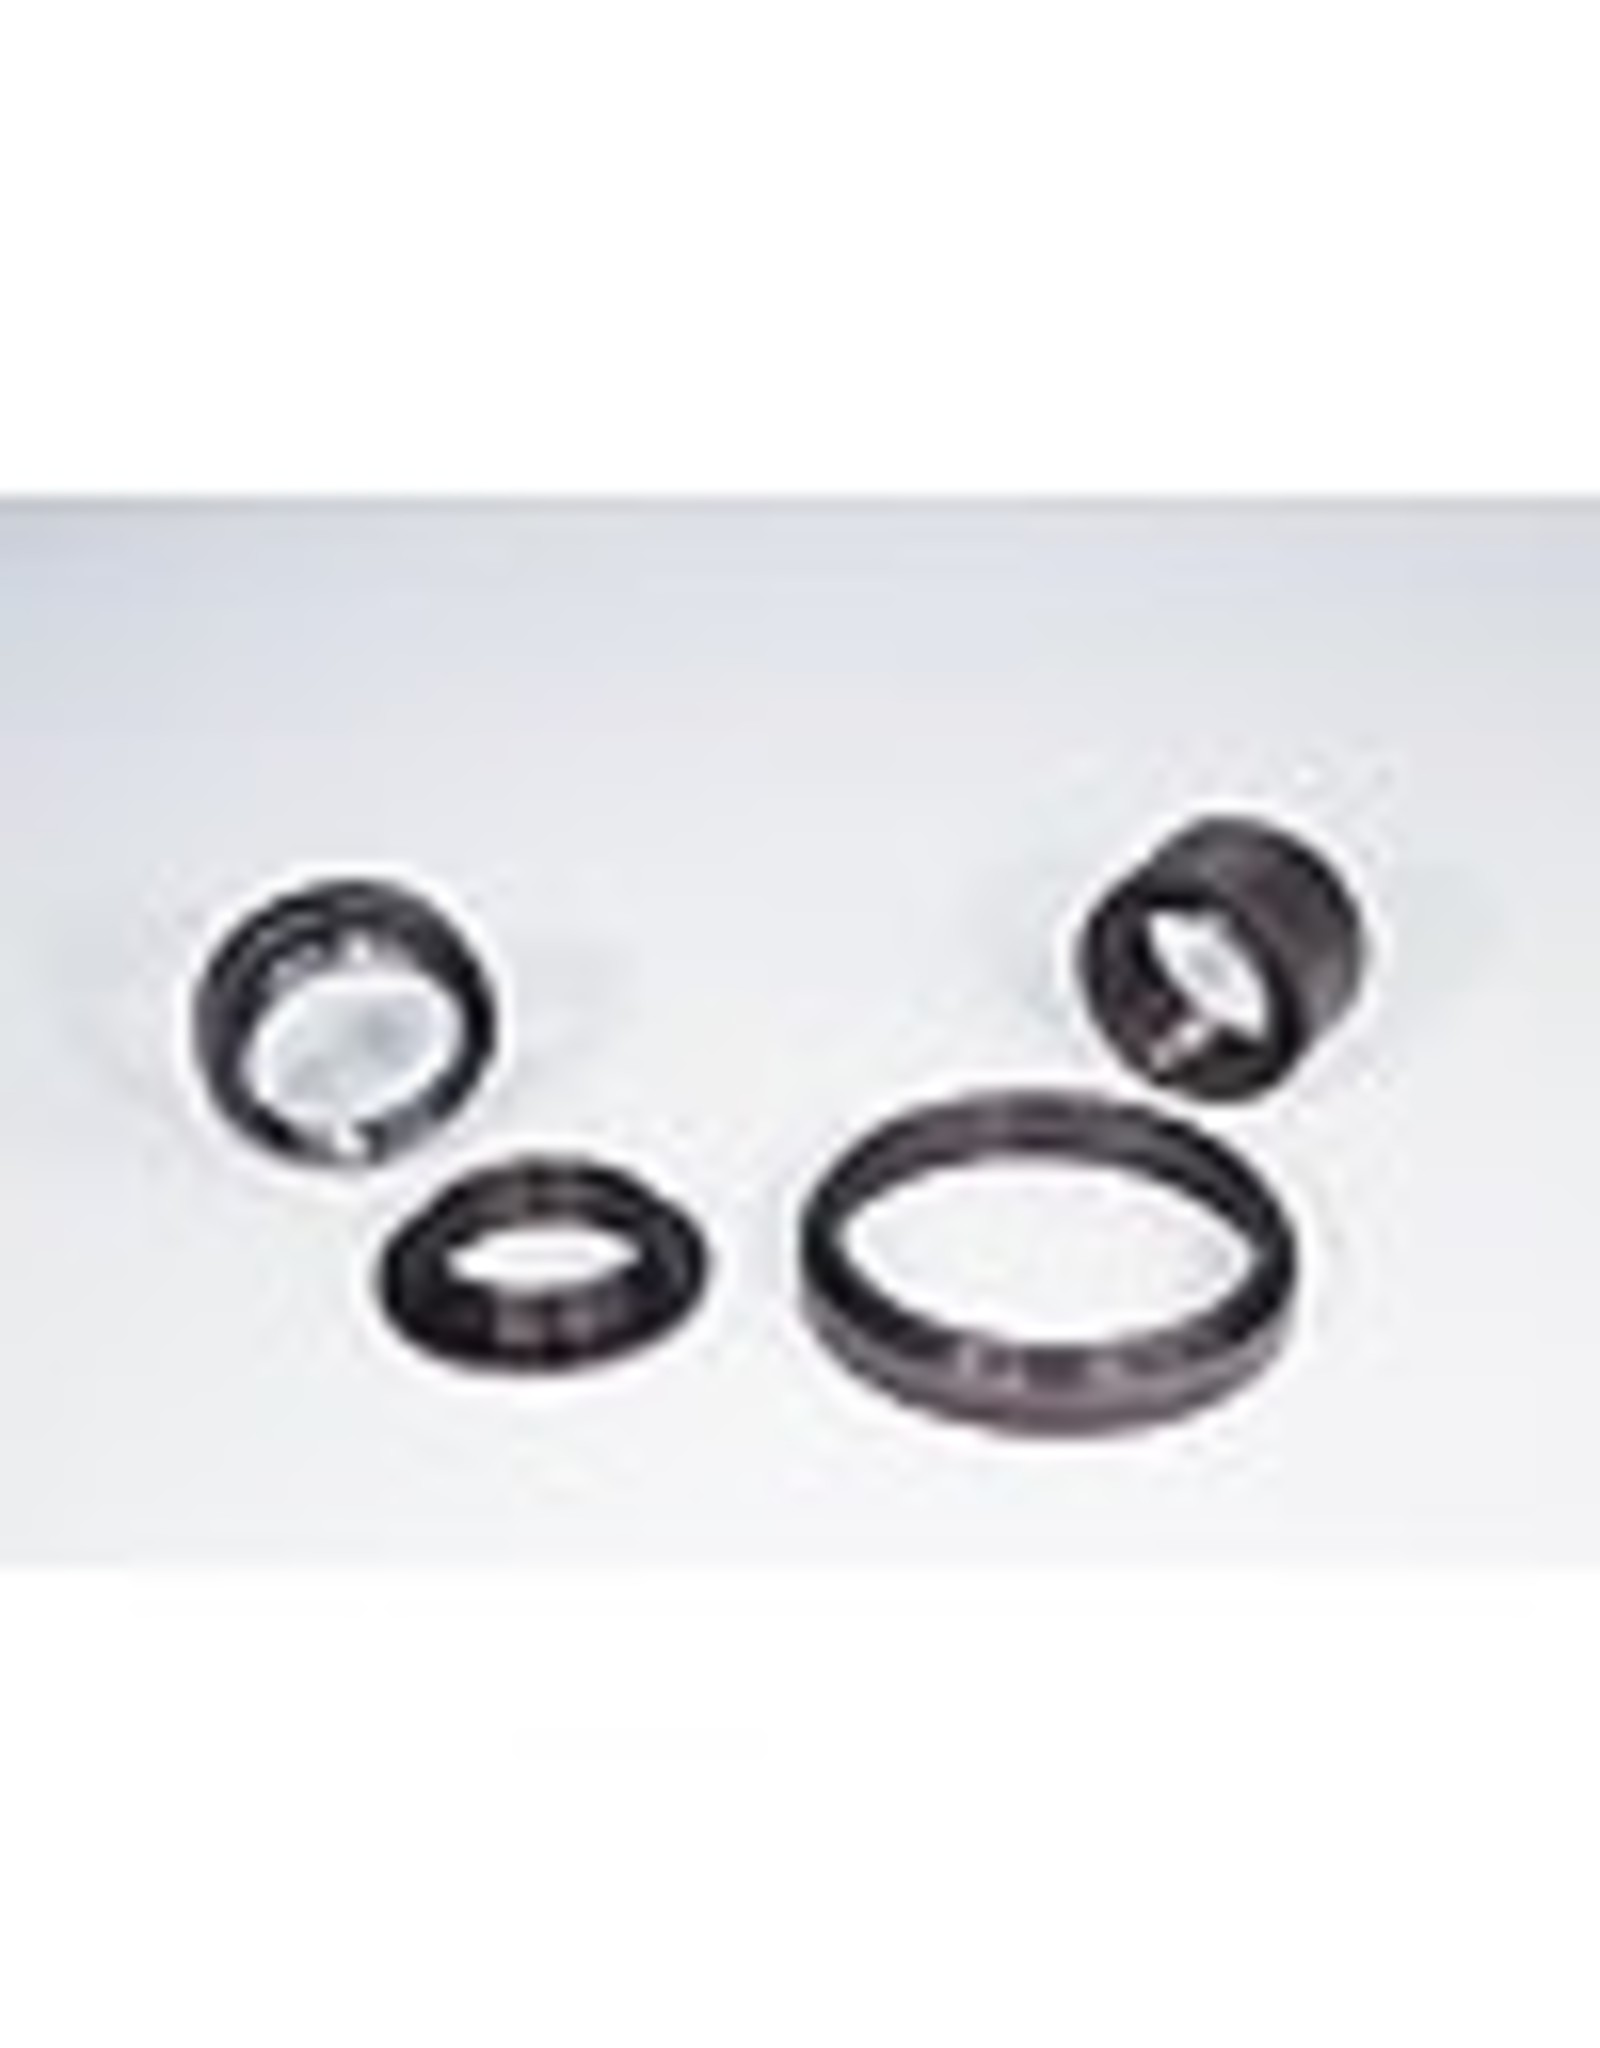 Takahashi Takahashi E-180, TOA-130FN or Mewlon Reducer Adapter/Spacer for SBIG ST-Series CCD Cameras & CFW10